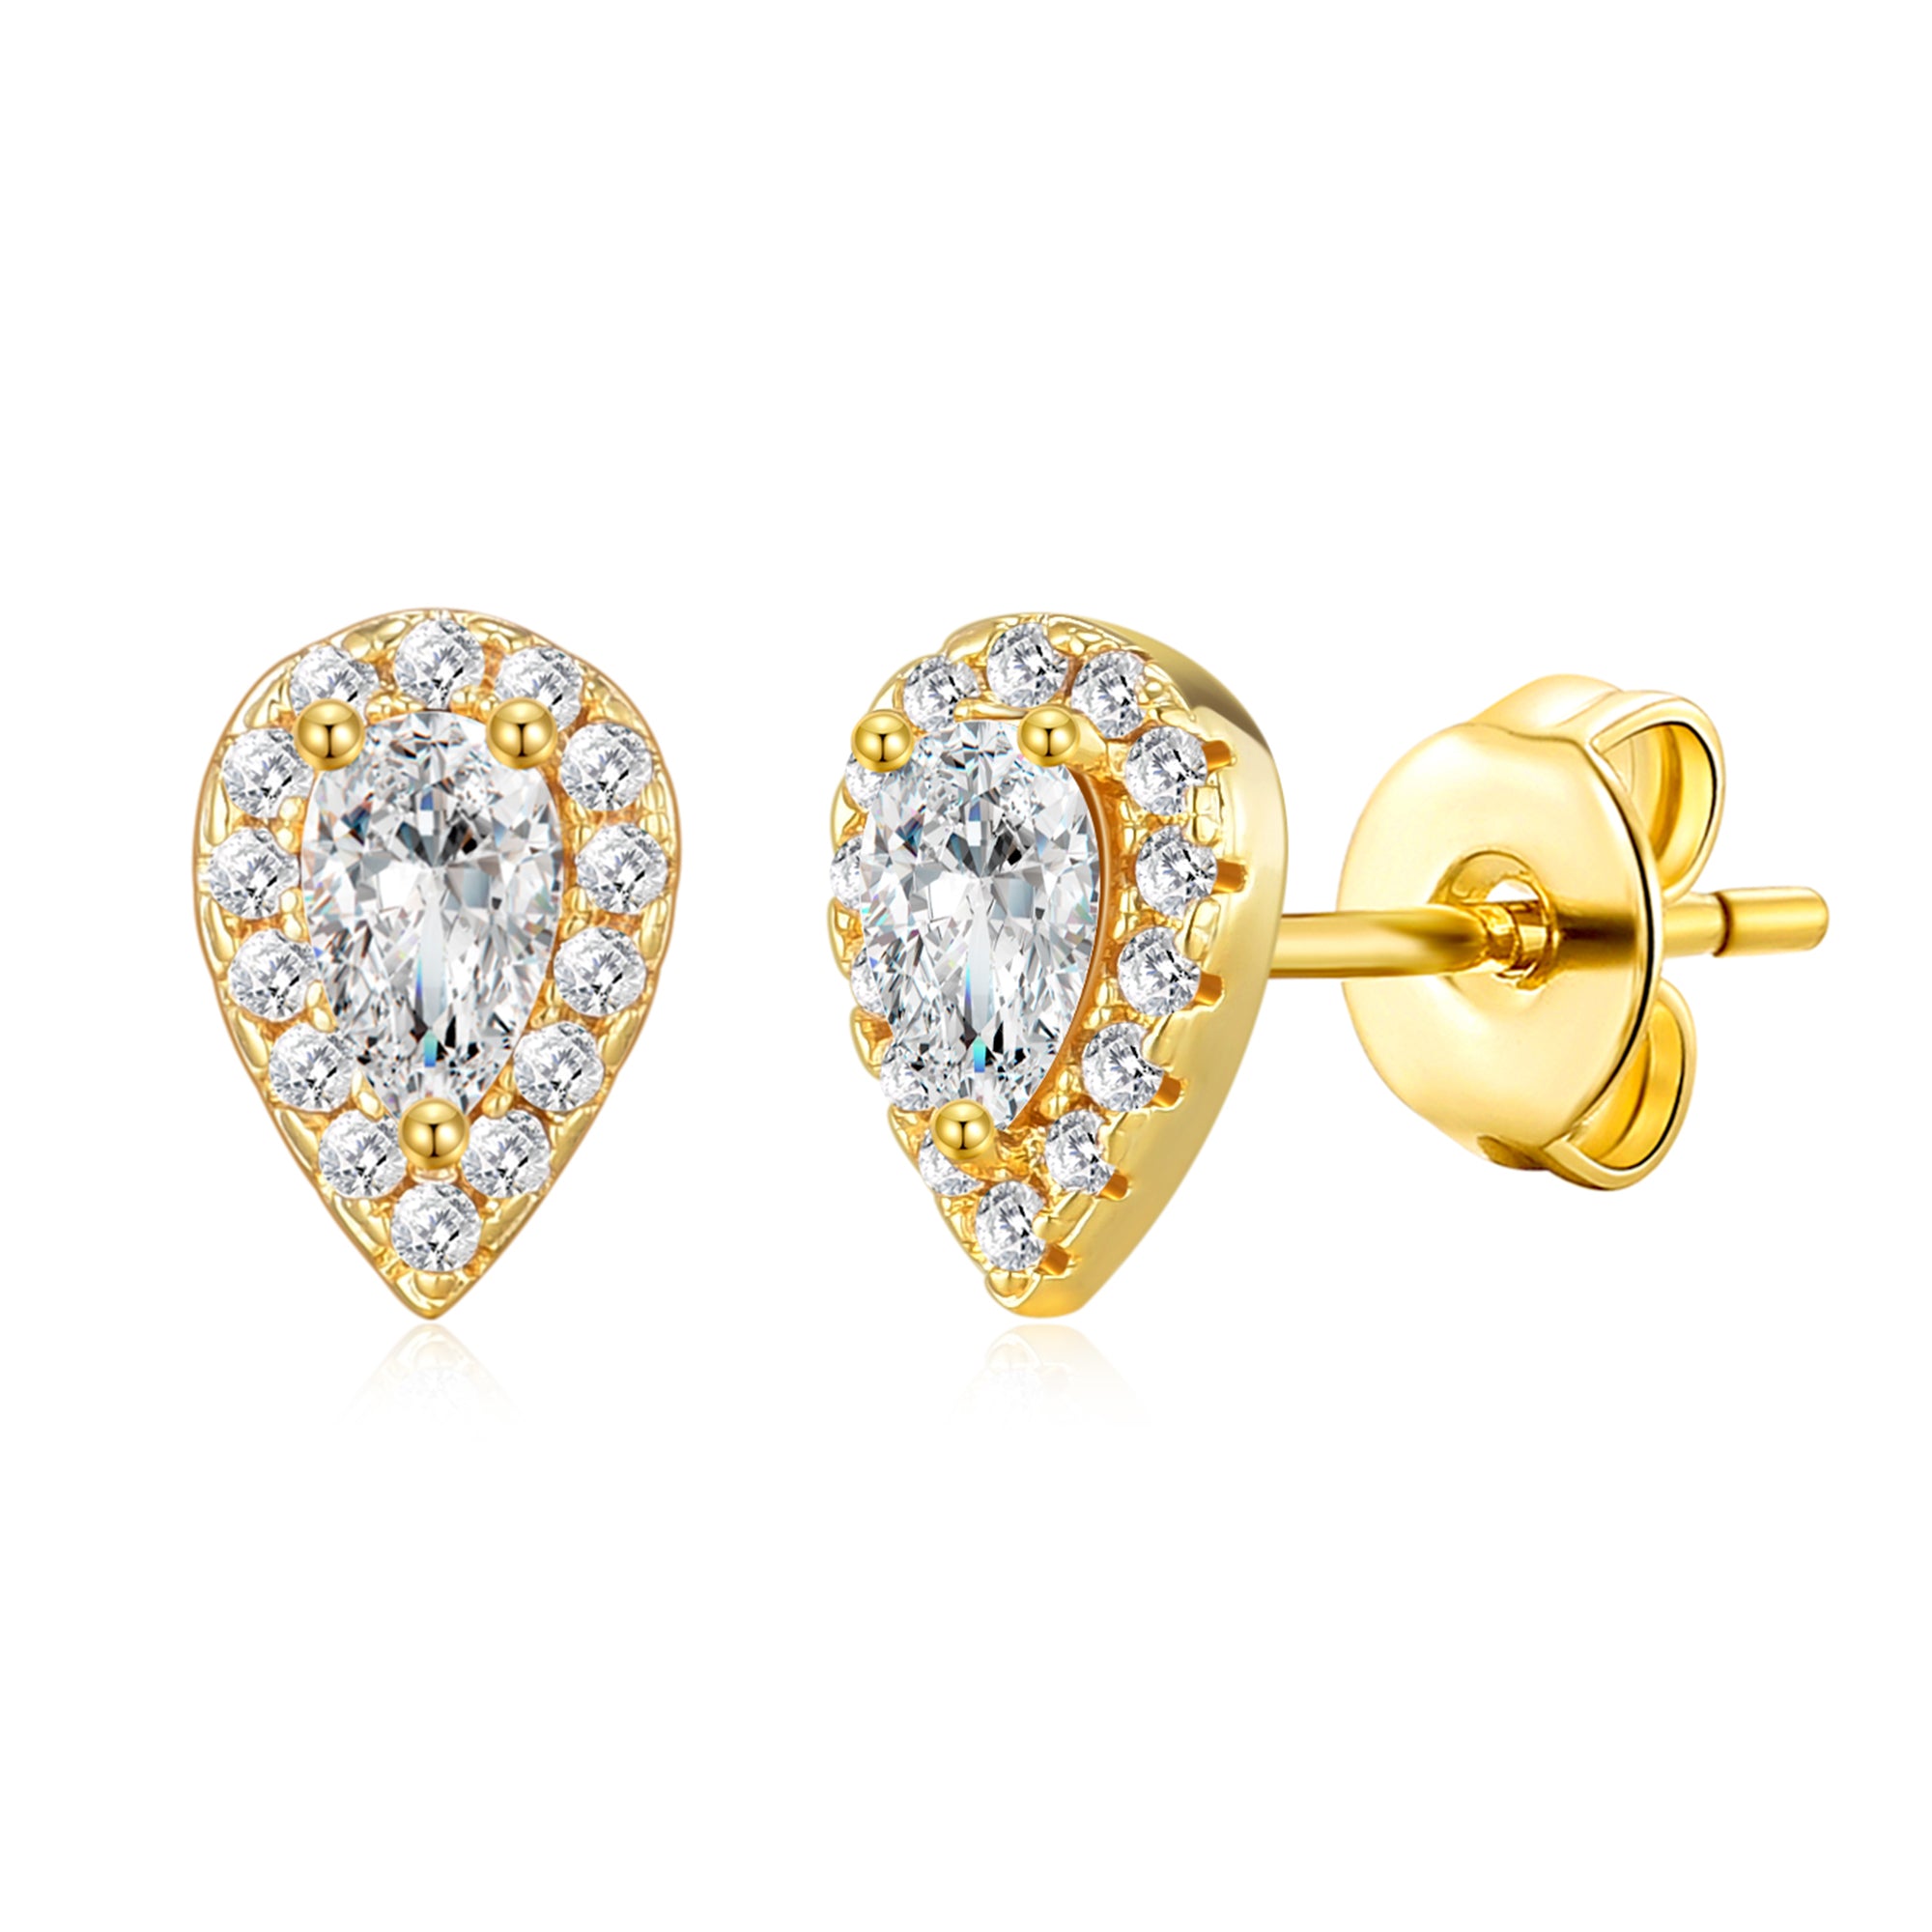 Gold Plated Pear Halo Earrings Created with Zircondia® Crystals by Philip Jones Jewellery